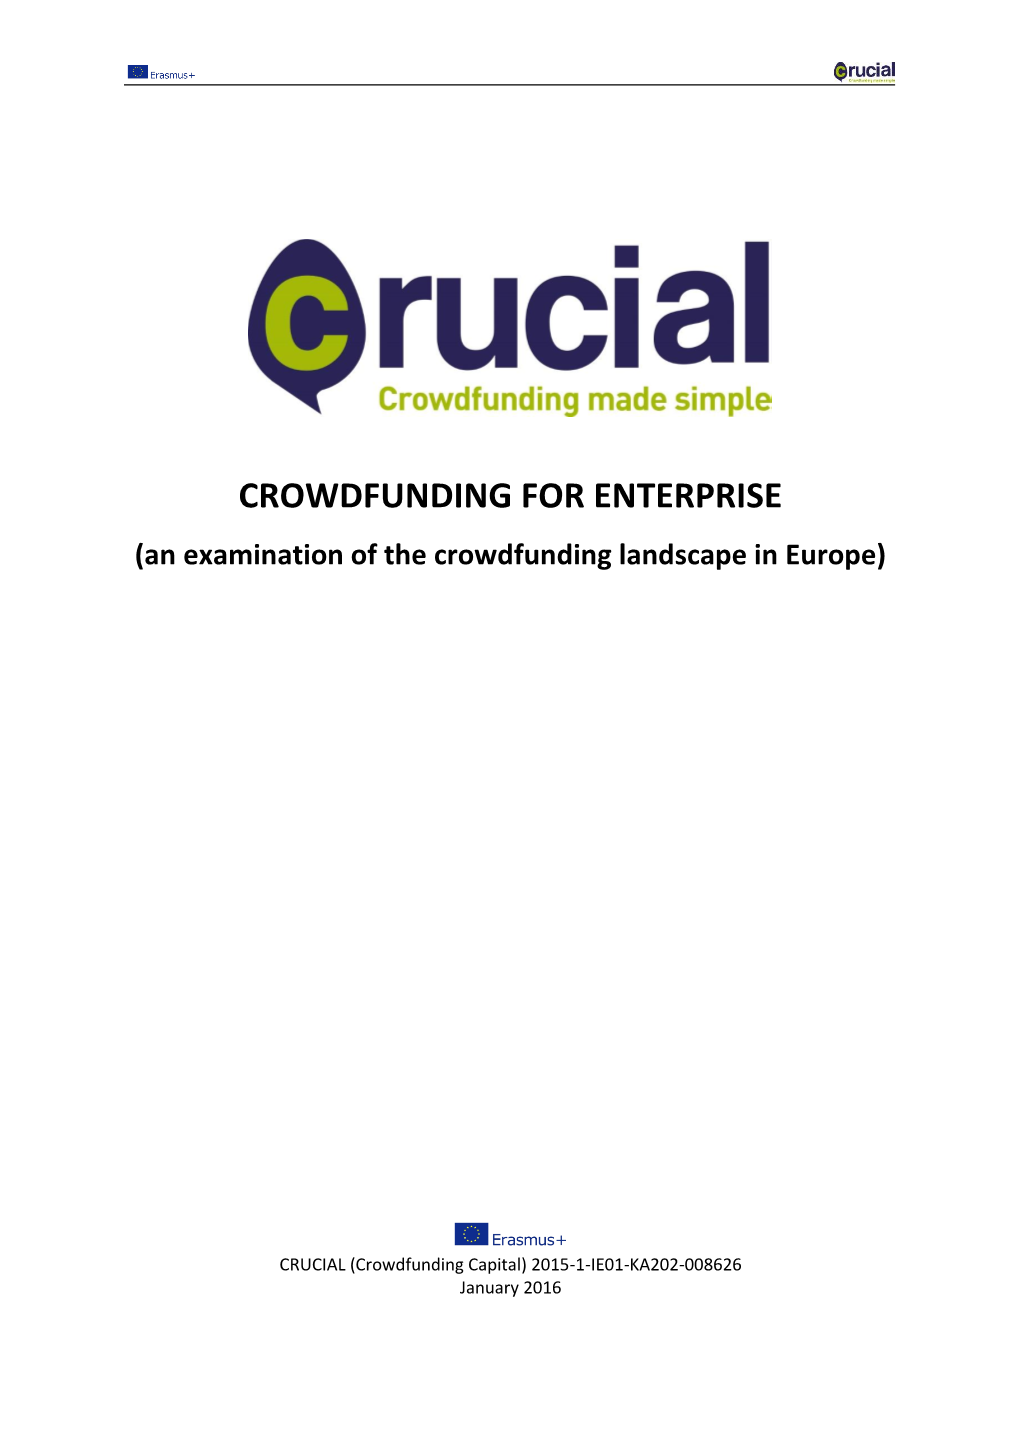 CROWDFUNDING for ENTERPRISE (An Examination of the Crowdfunding Landscape in Europe)